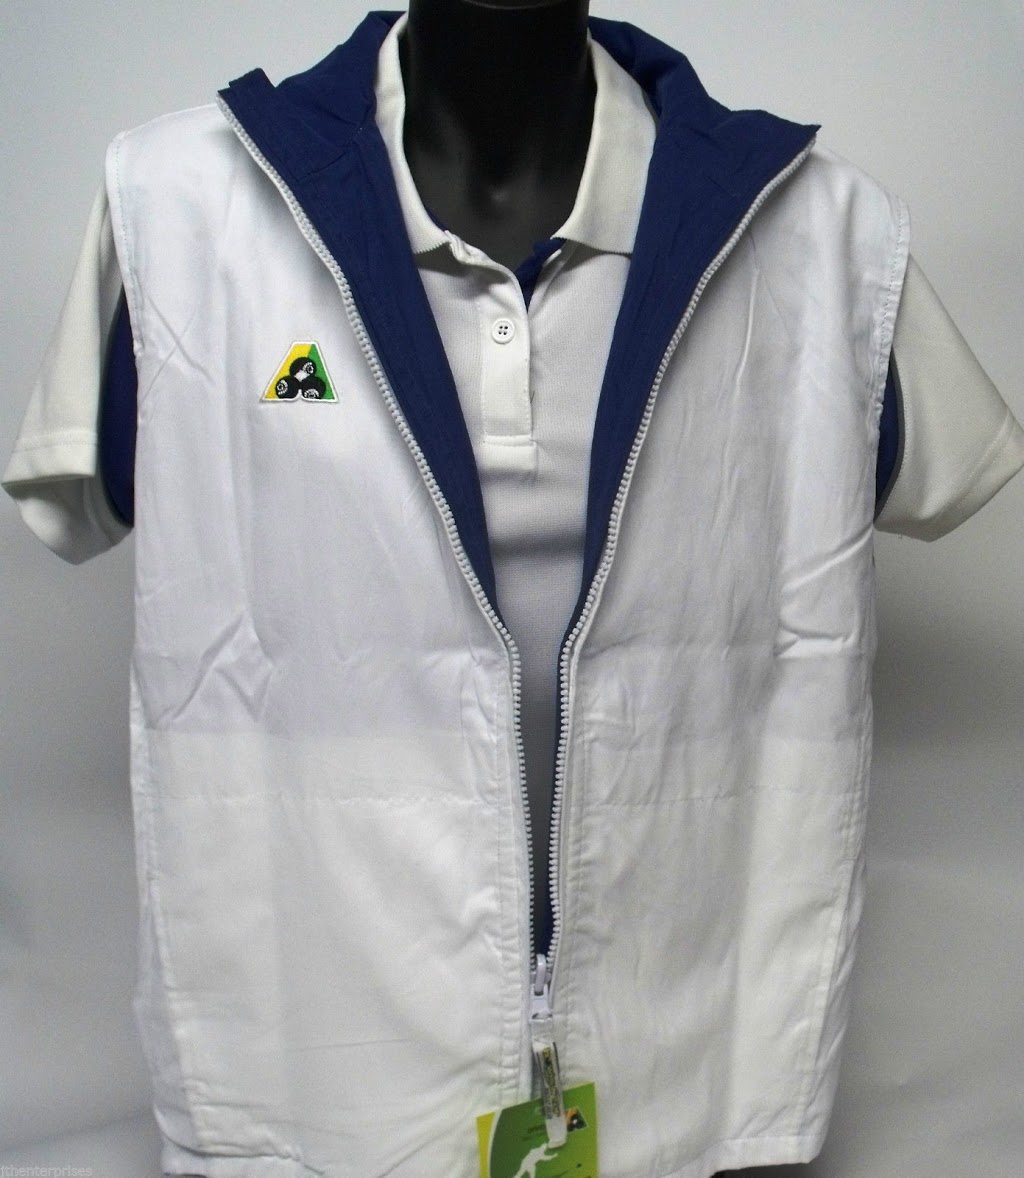 Lawn Bowls R Us | clothing store | 10 View St, Paynesville VIC 3880, Australia | 0418387538 OR +61 418 387 538